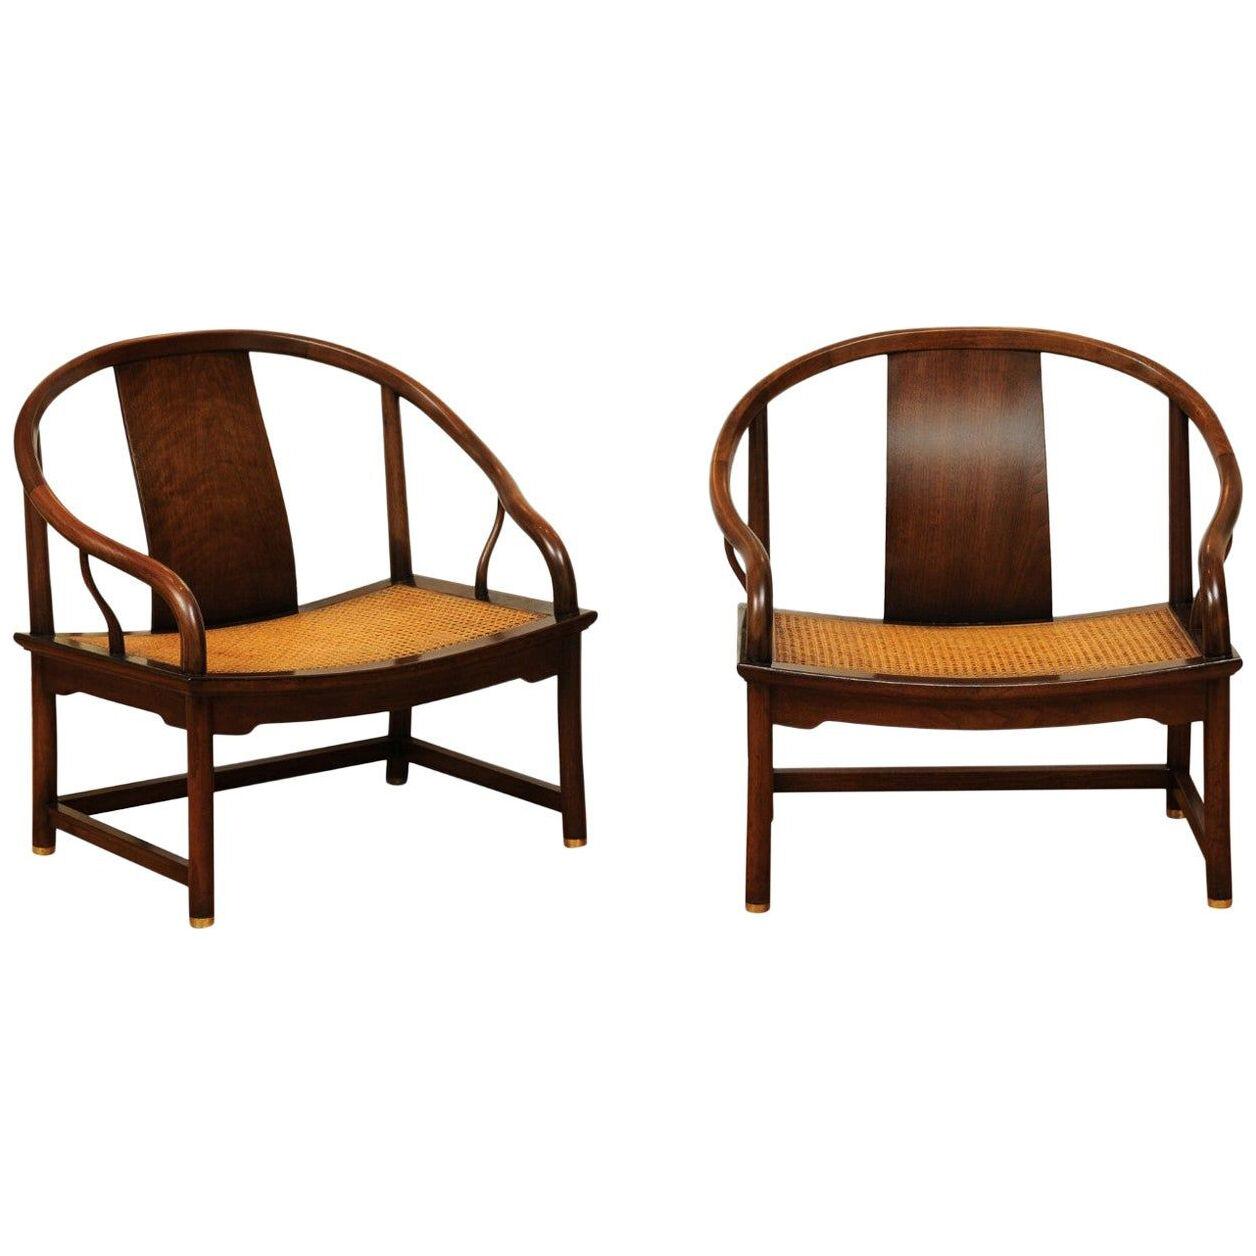 Stunning Restored Pair of Walnut Cane Loungers by Michael Taylor, circa 1960